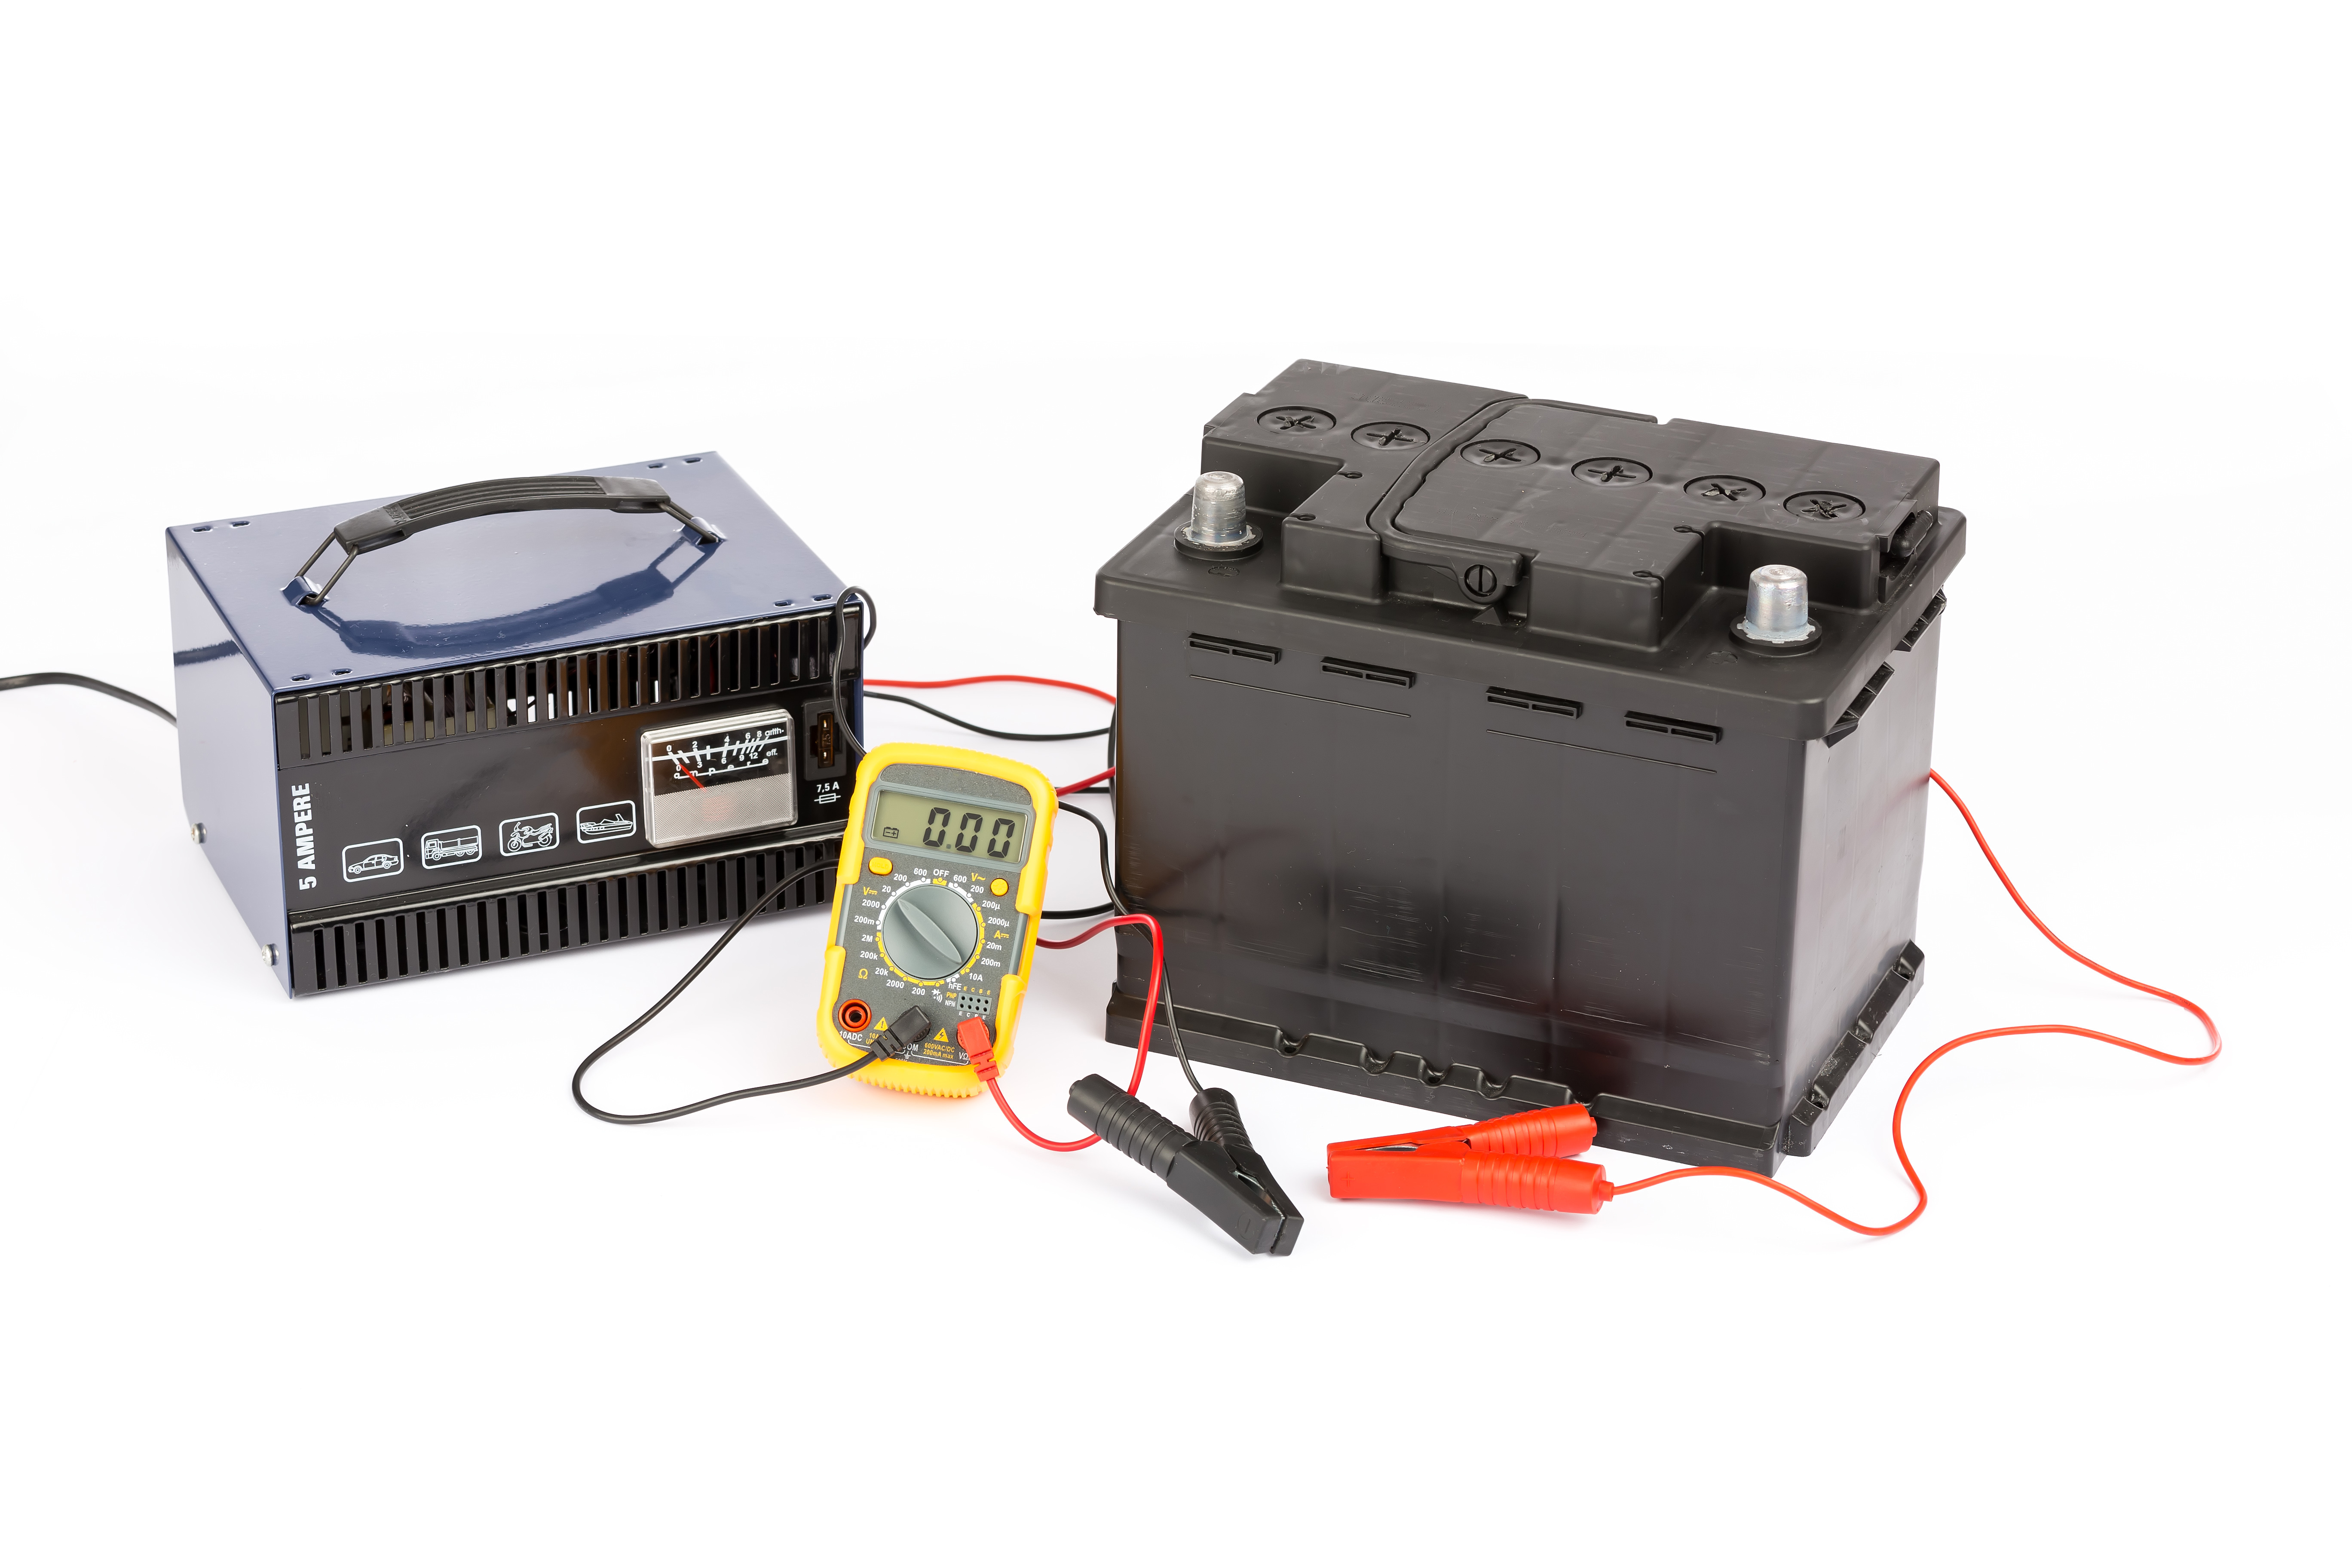 What is a safe charge rate or voltage setting for a battery used outdoors?